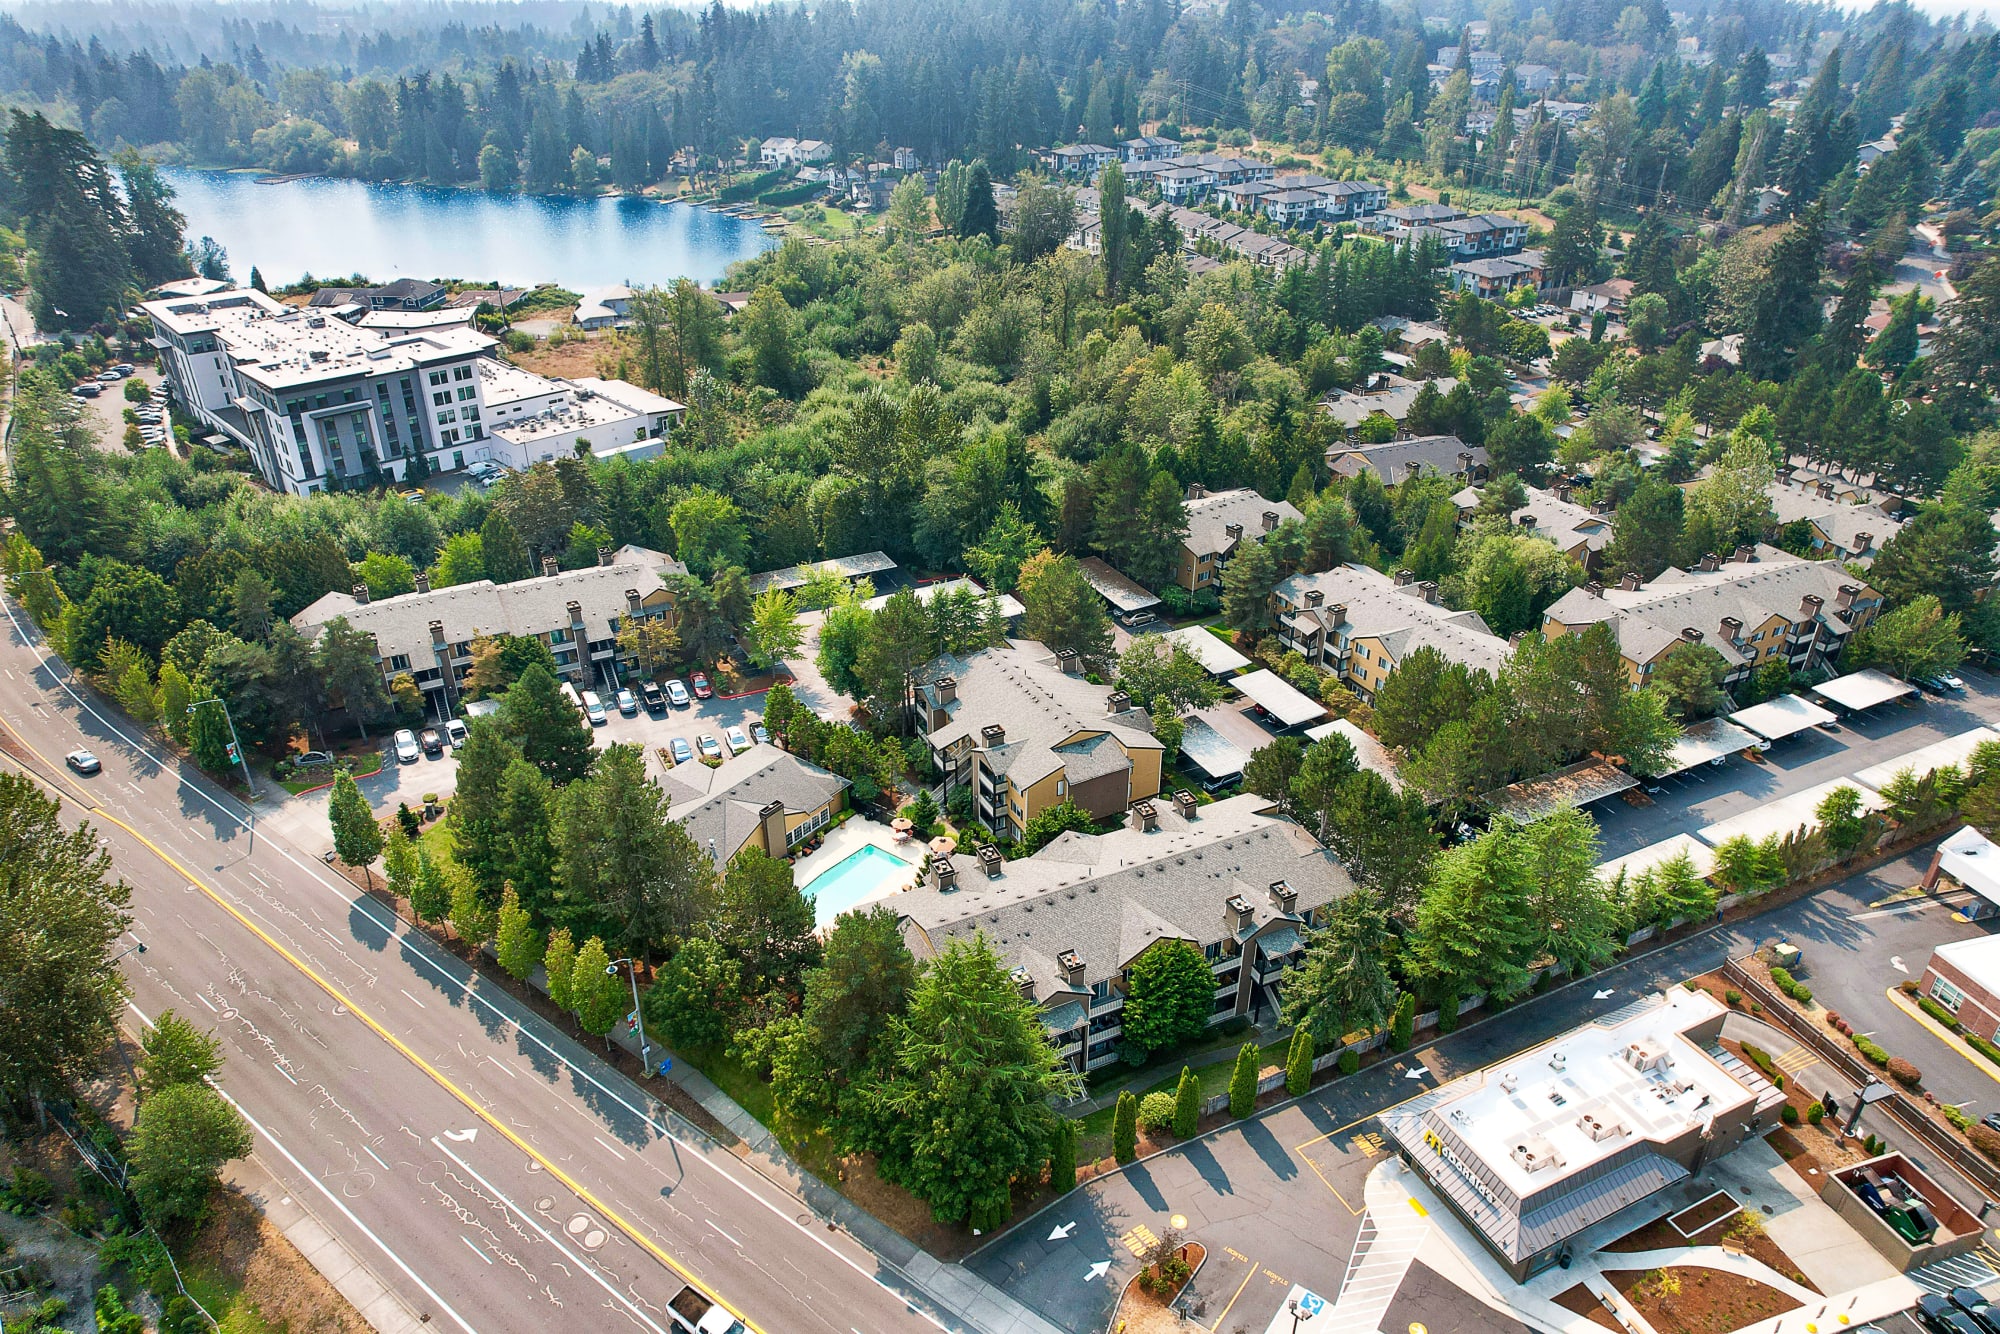 Aerial view of the property and surrounding areas at Newport Crossing Apartments in Newcastle, Washington